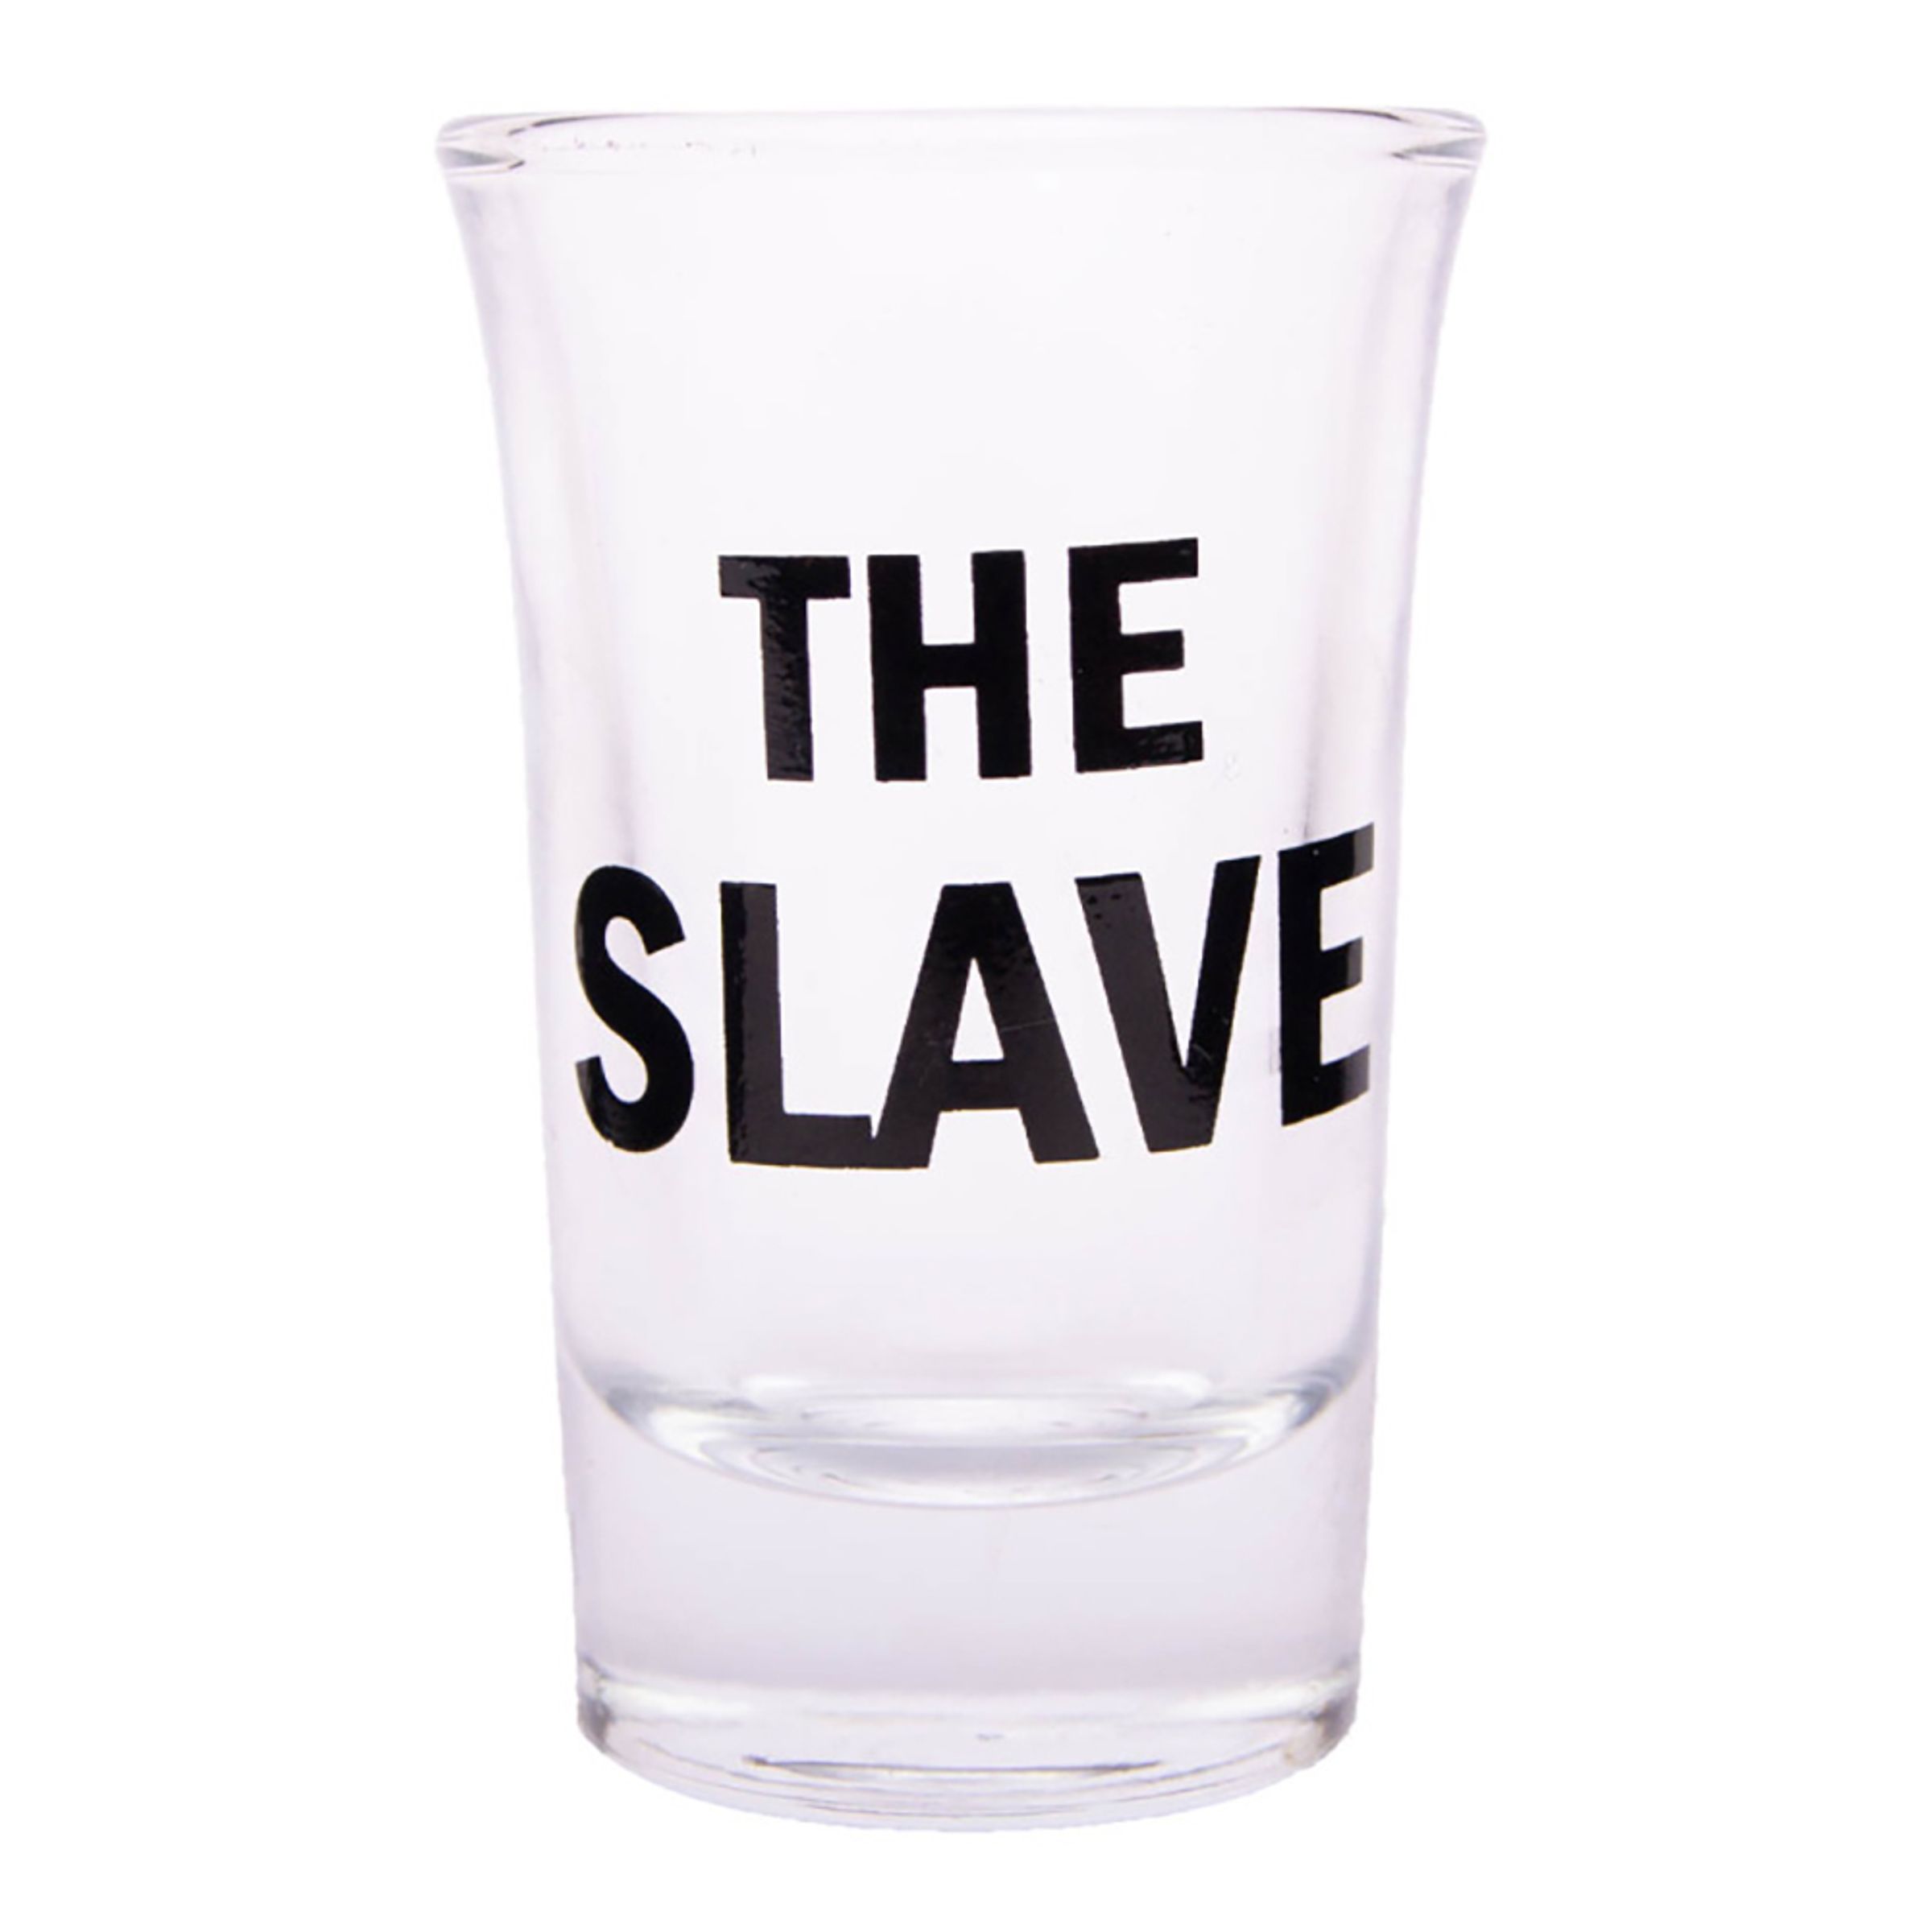 Snapsglas med Text - The slave